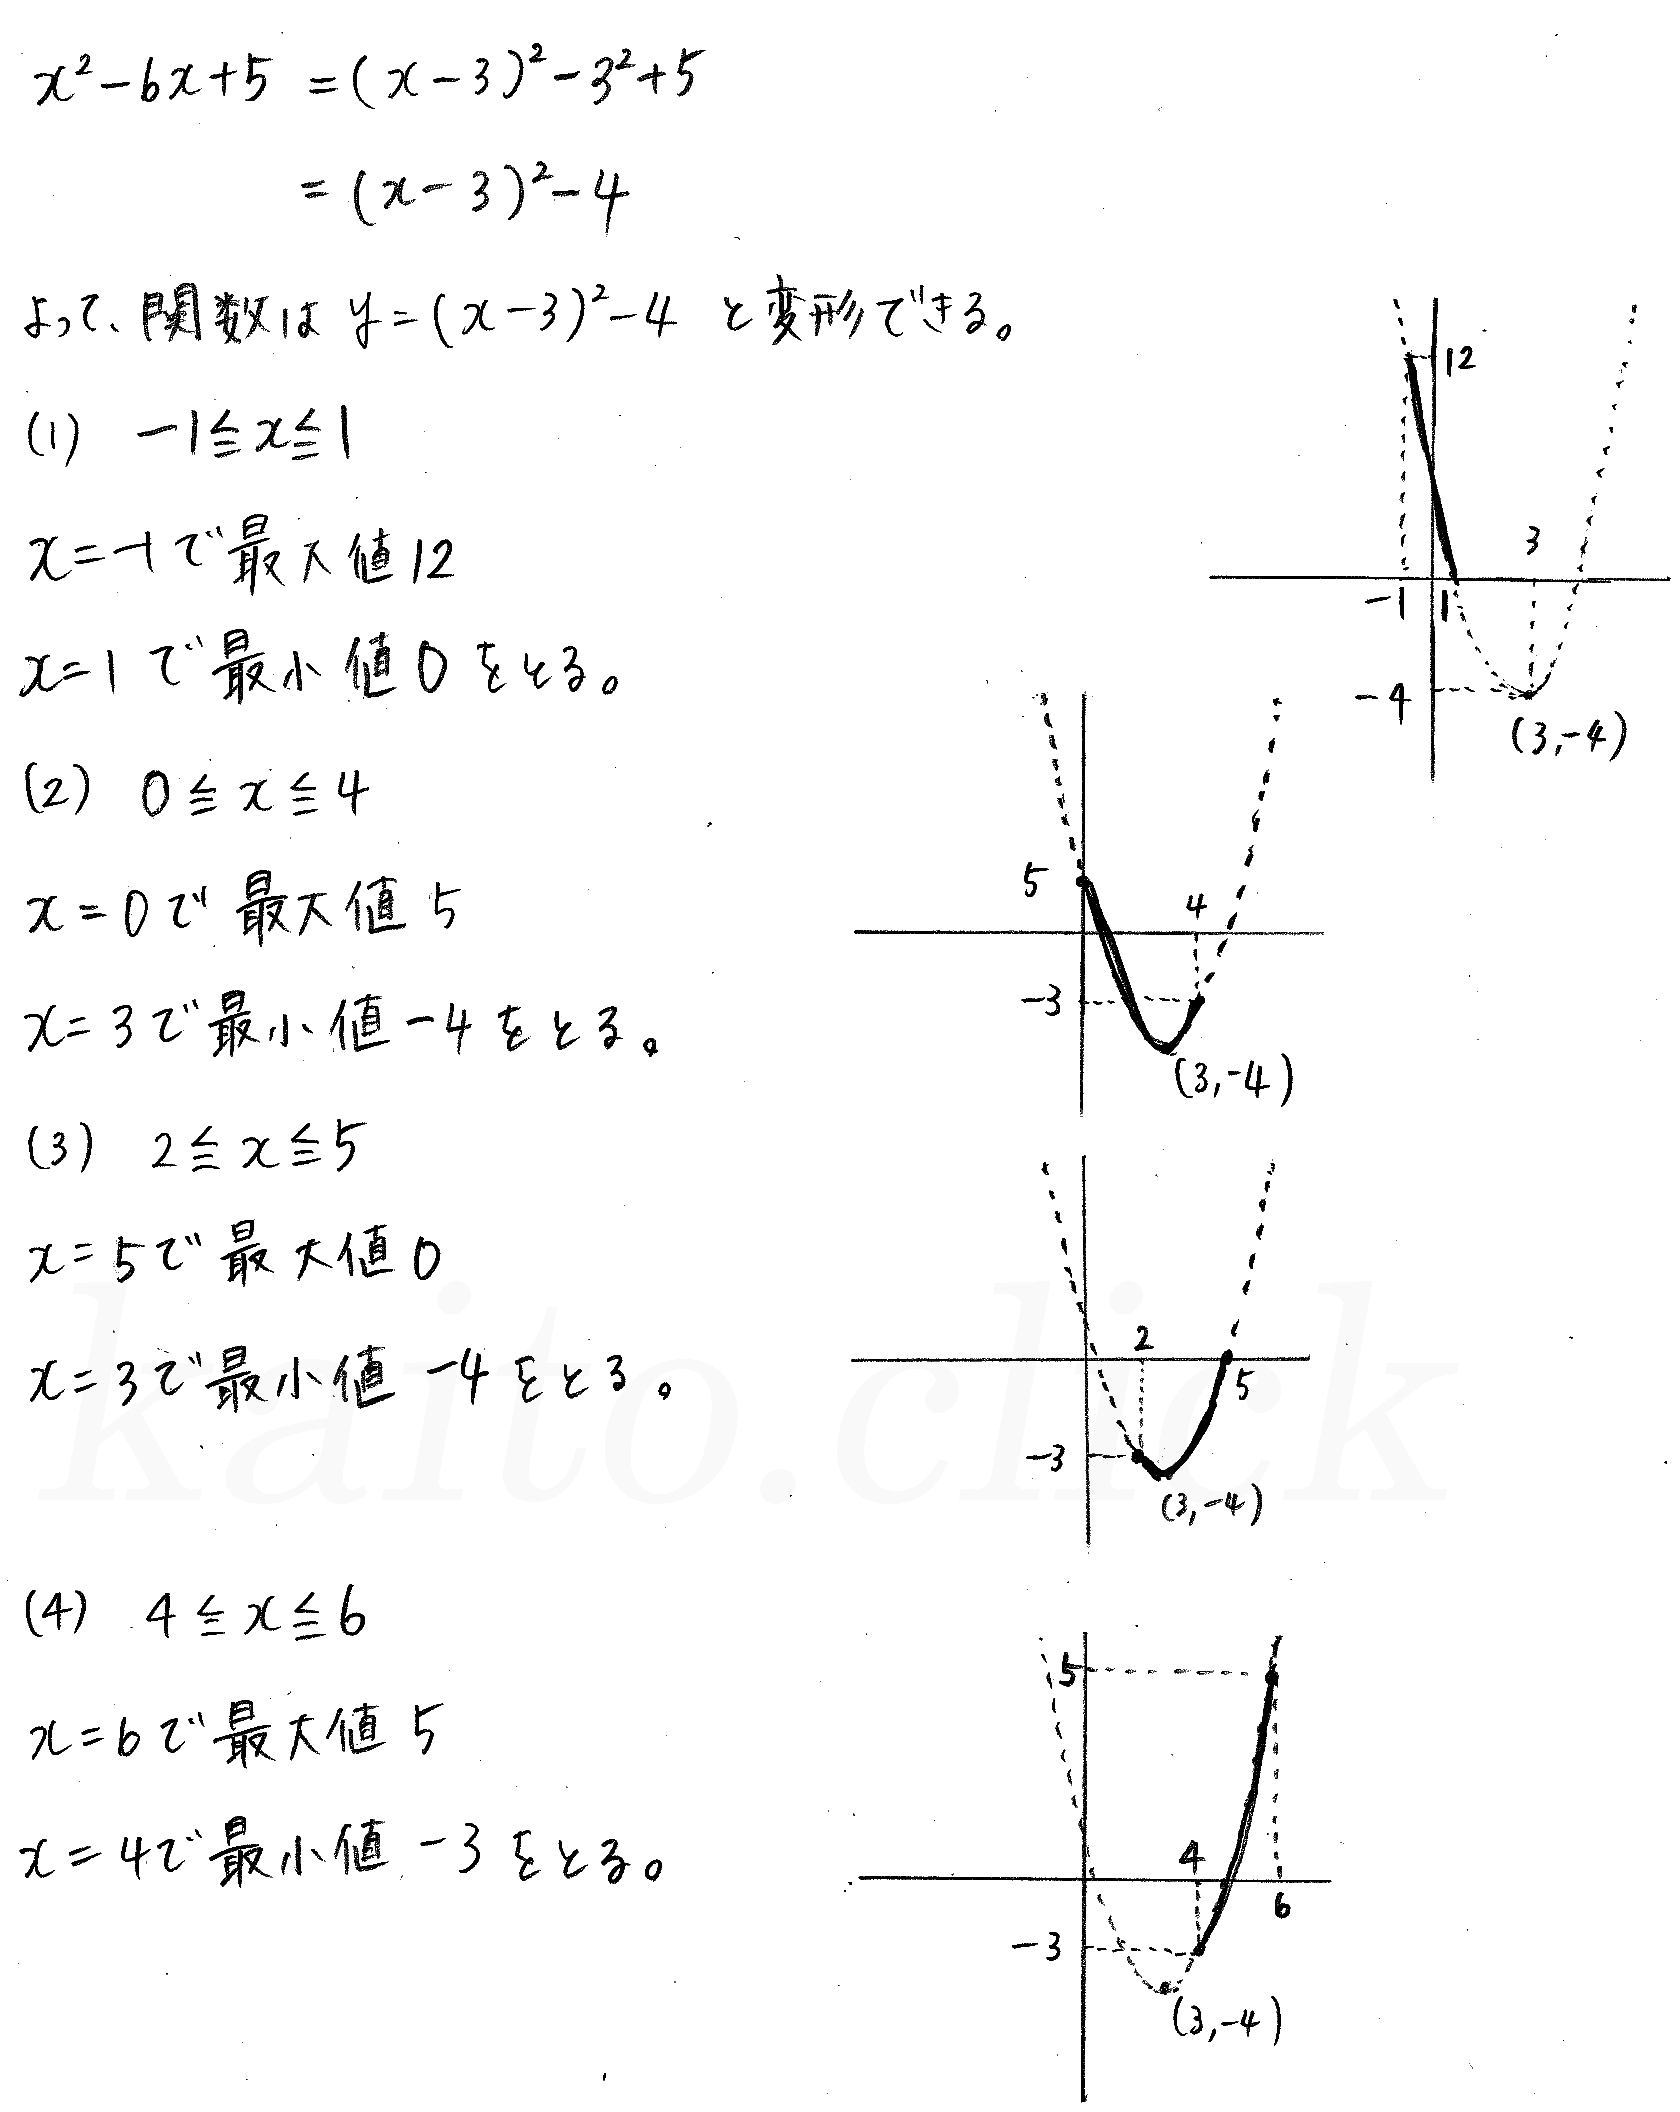 clear数学Ⅰ-187解答 